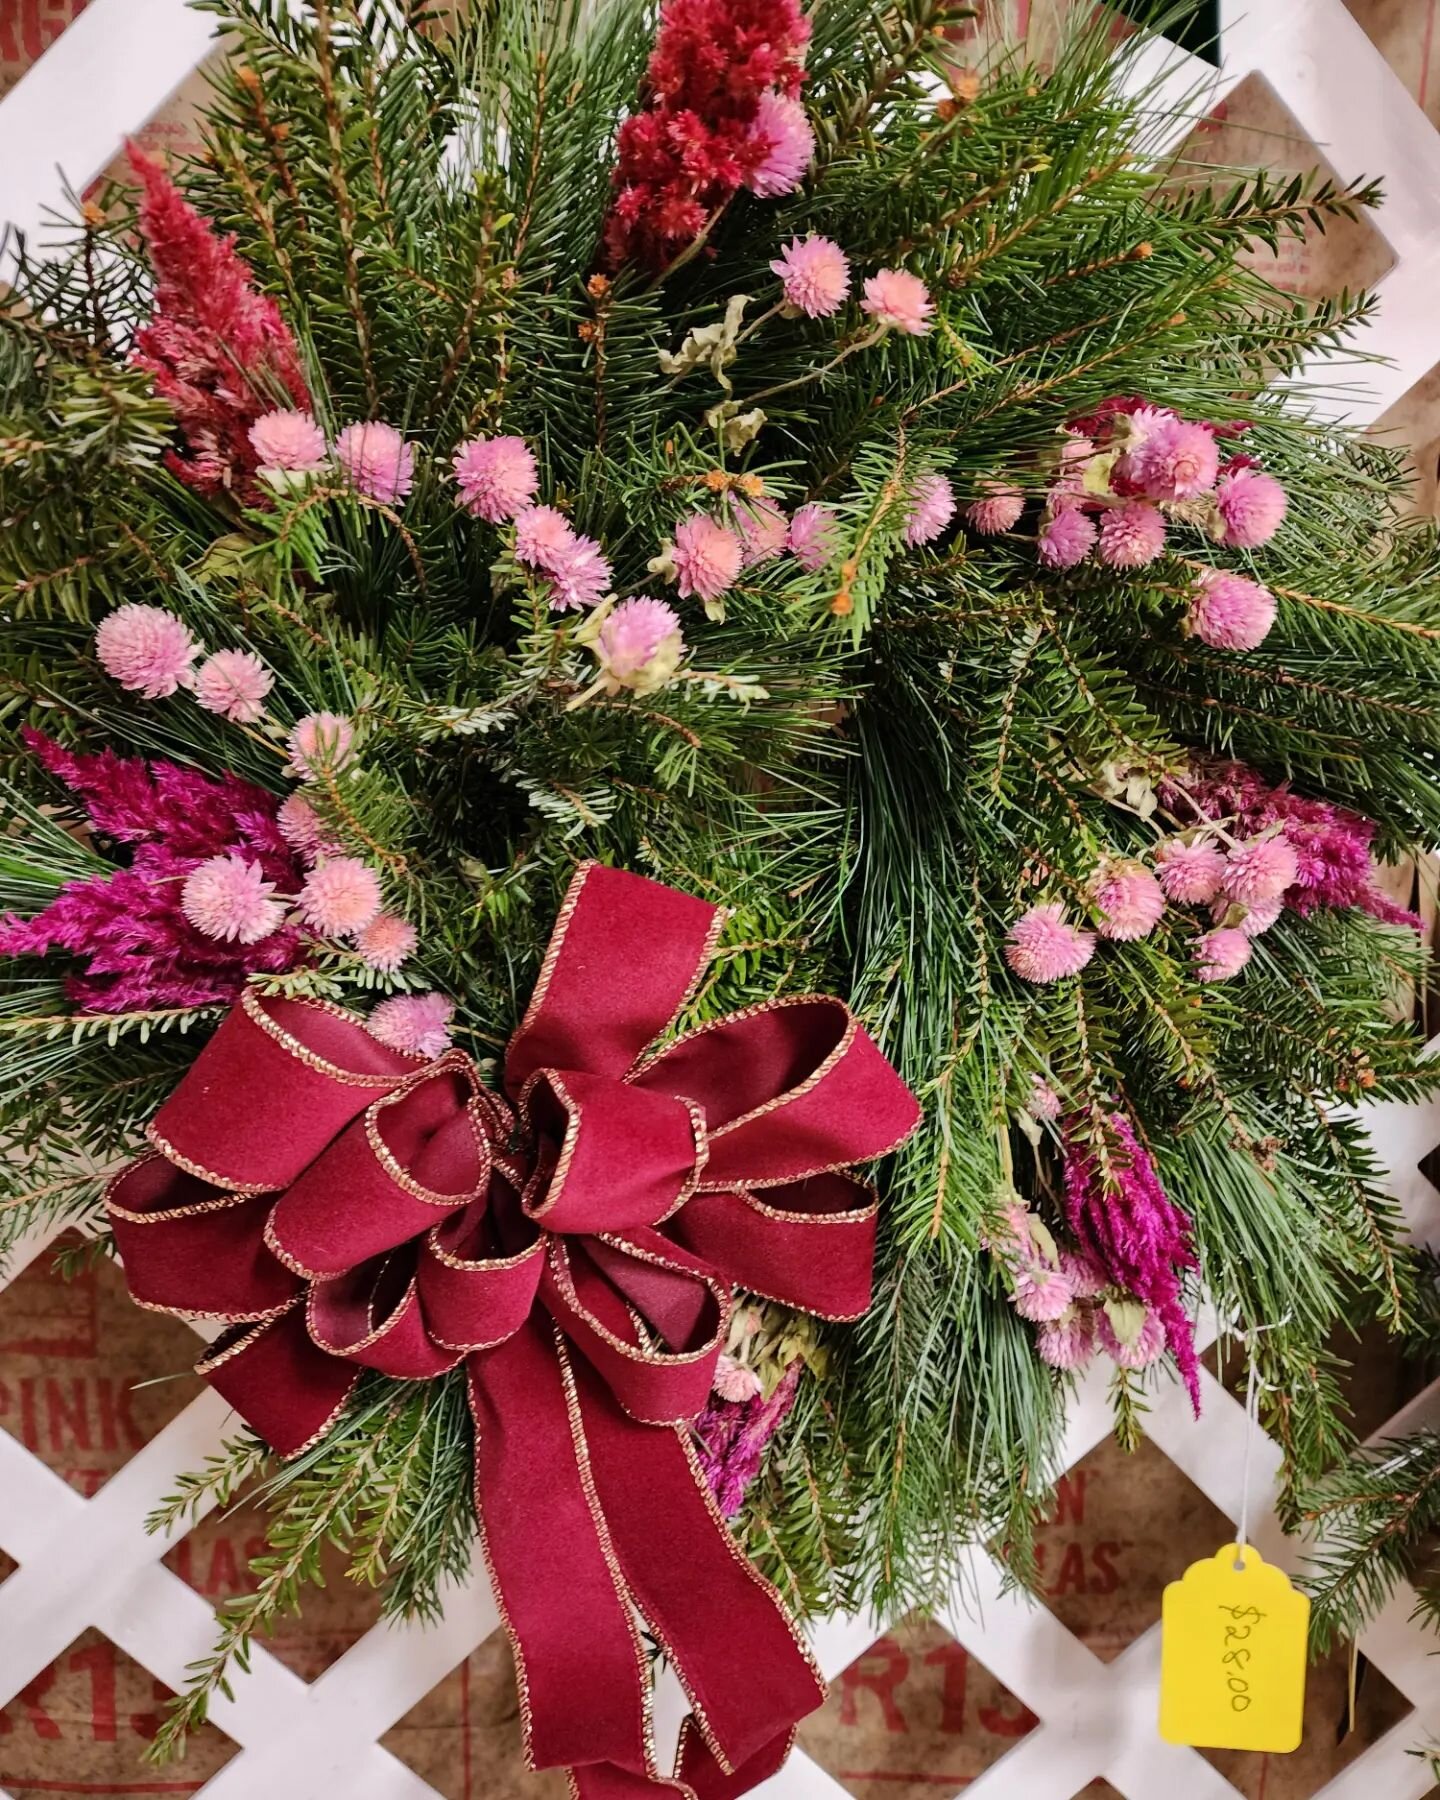 Our Wreath Extravaganza continues!
We are open today Dec 3th until 3 pm and tomorrow, Sunday Dec 4th 9am to 3 pm, down in our barn. Don't let the rain stop you from coming. It's warm and dry in our barn.  We have a great selection of evergreens and d